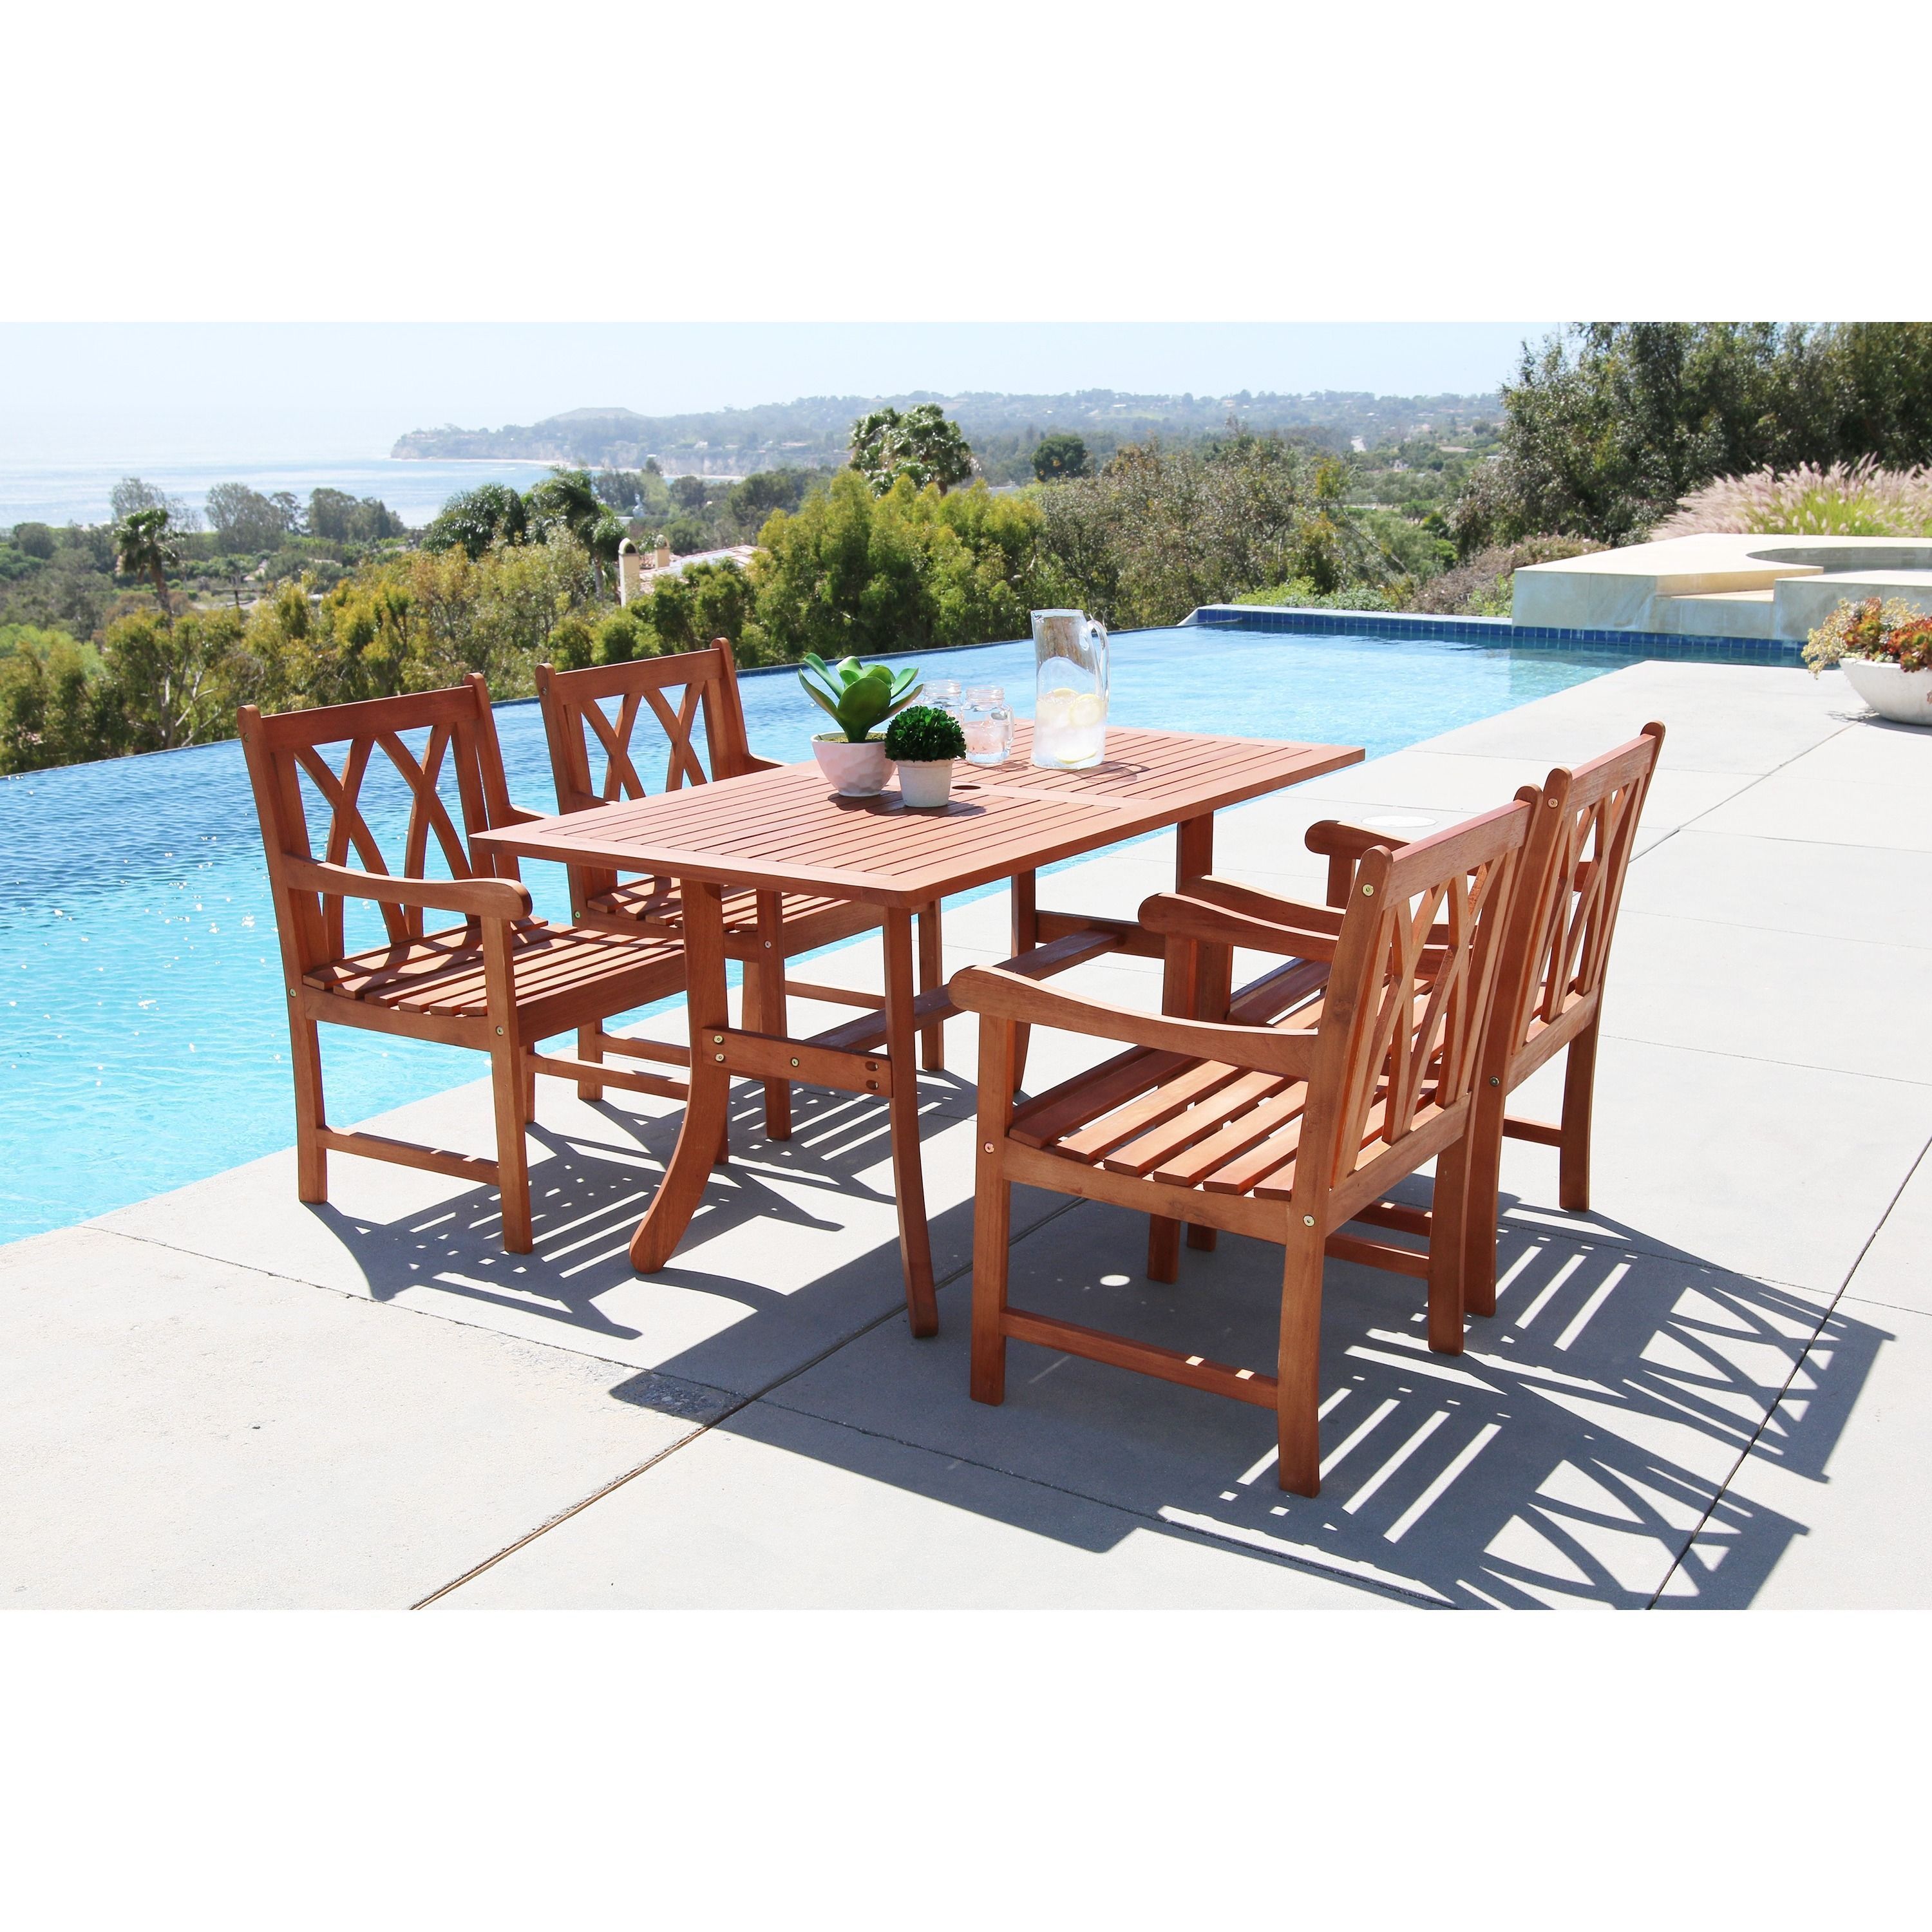 Baxton Studio Keitaro 5 Piece Dining Sets Within Most Popular Vifah Malibu Eco Friendly 5 Piece Outdoor Hardwood Dining Set With (View 16 of 20)